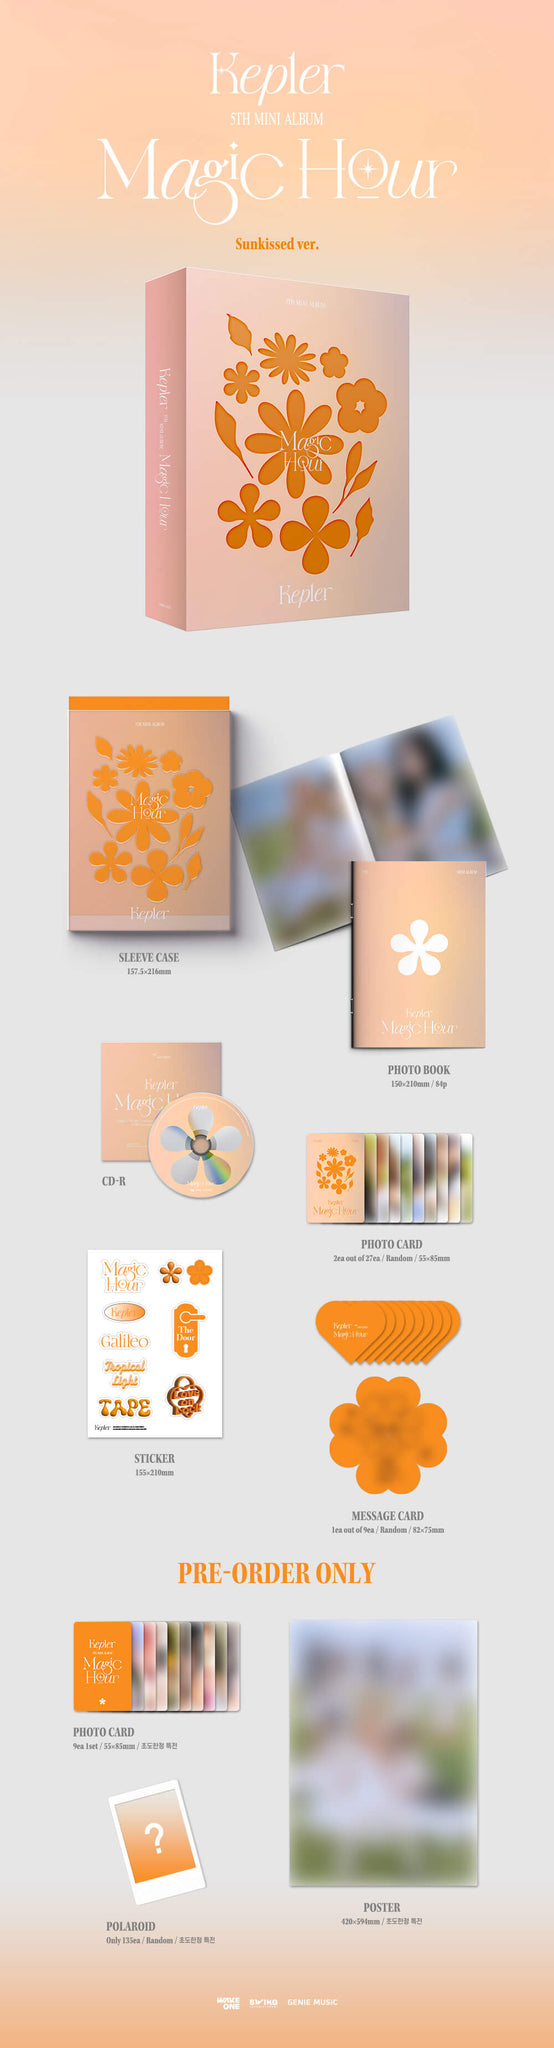 Kep1er Magic Hour Sunkissed Ver. Inclusions Sleeve Case Photobook CD Photocards Sticker Message Card Pre-order Photocard Set Poster Limited Polaroid 